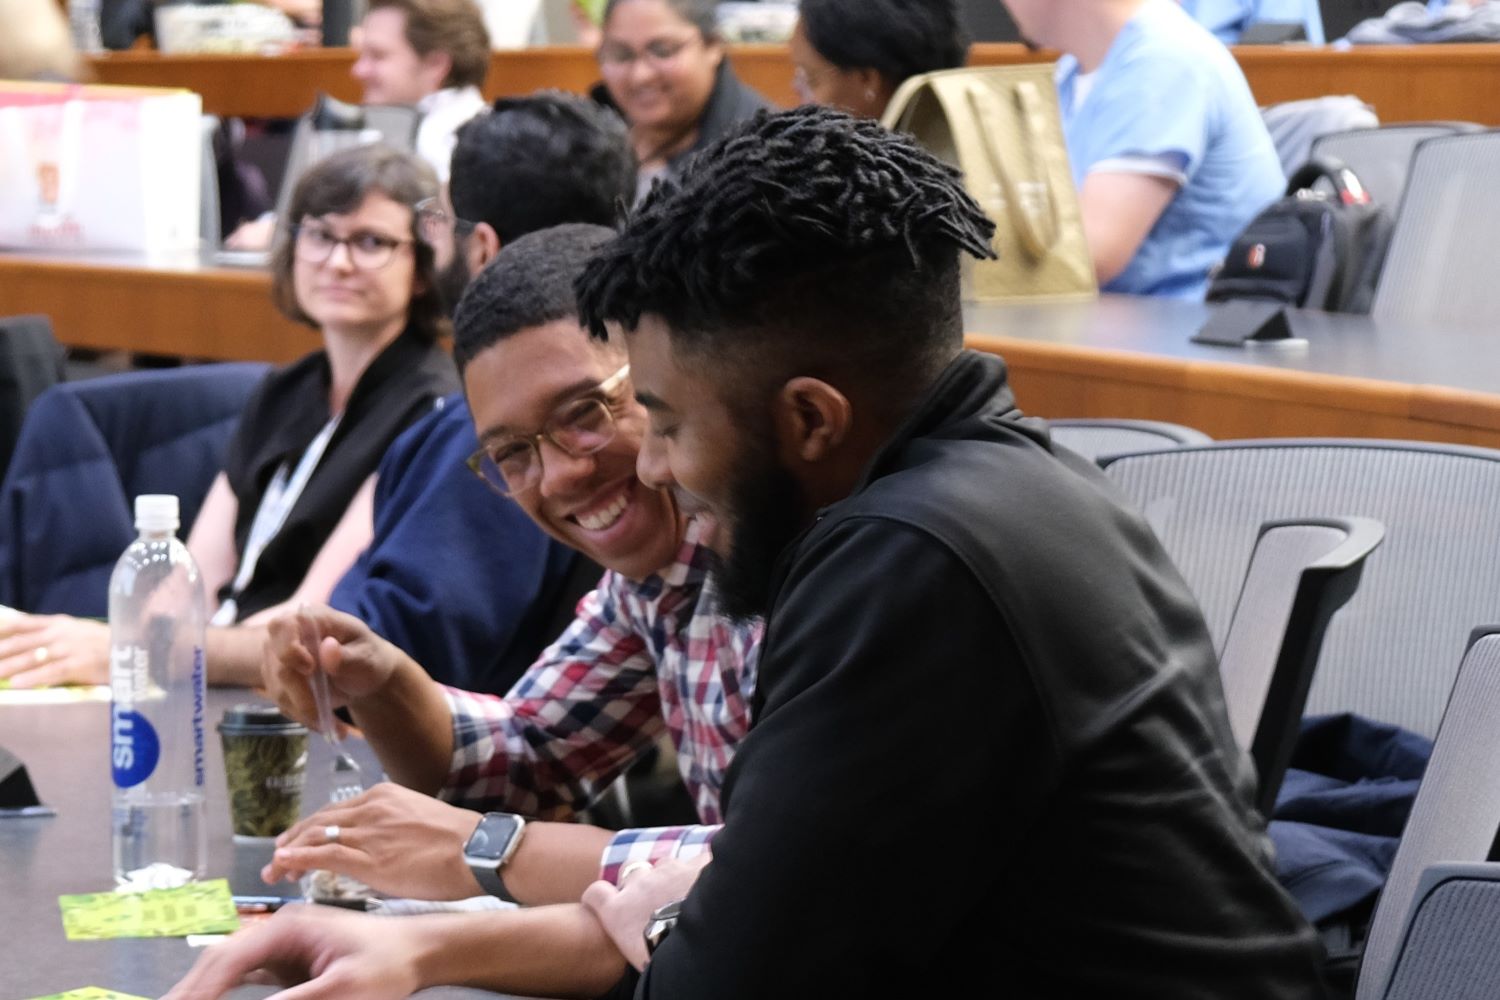 two people laughing and talking over lunch in a large lecture hall with others in the background